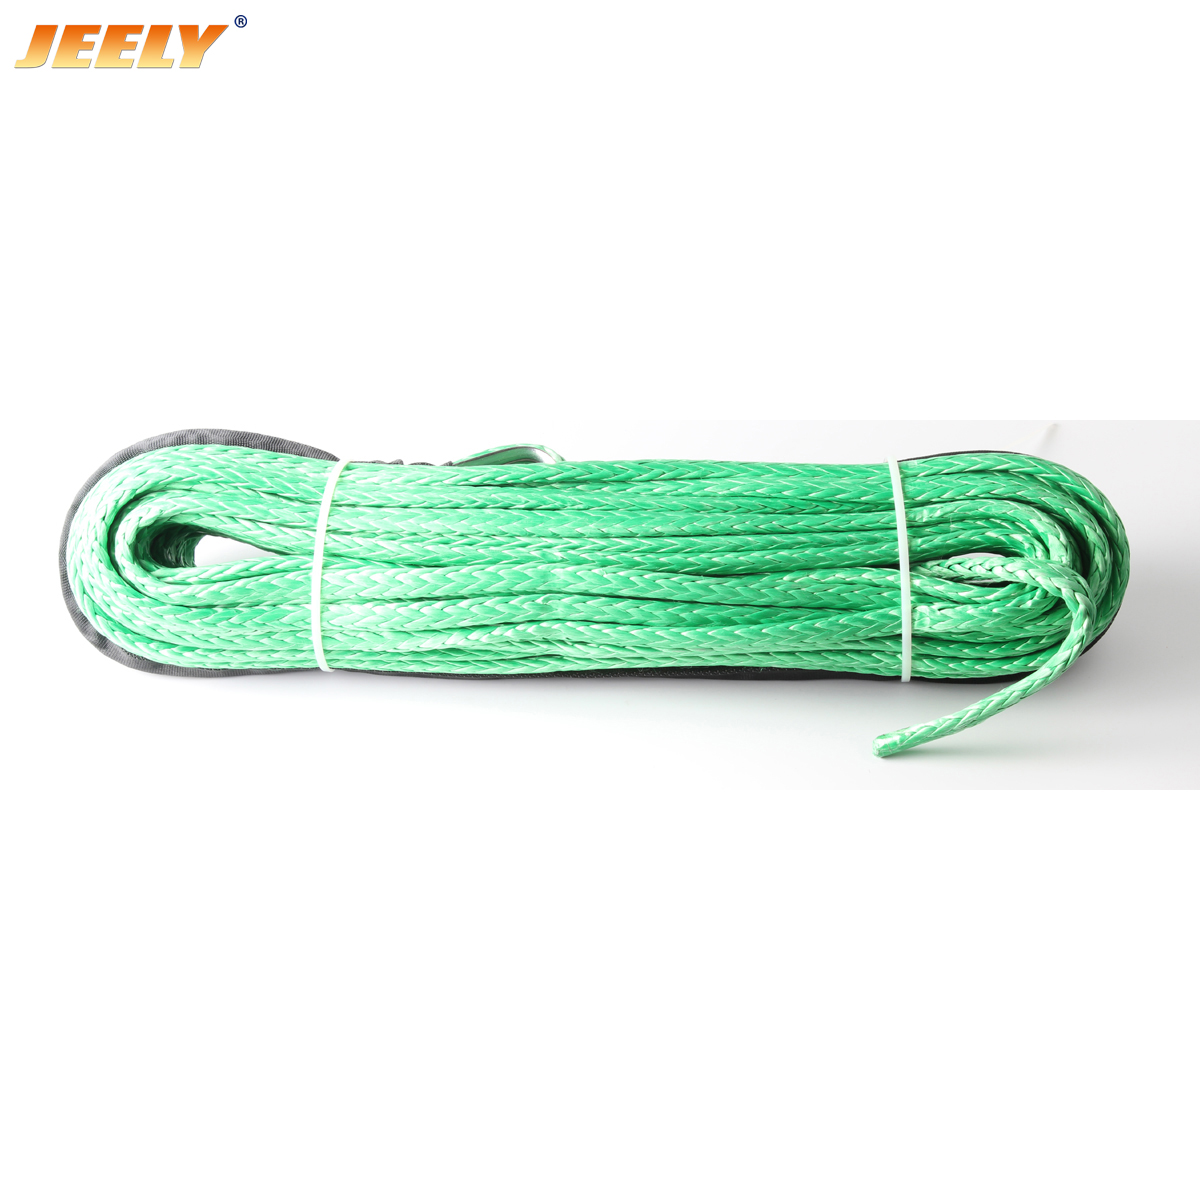 15mm spectra synthetic winch rope